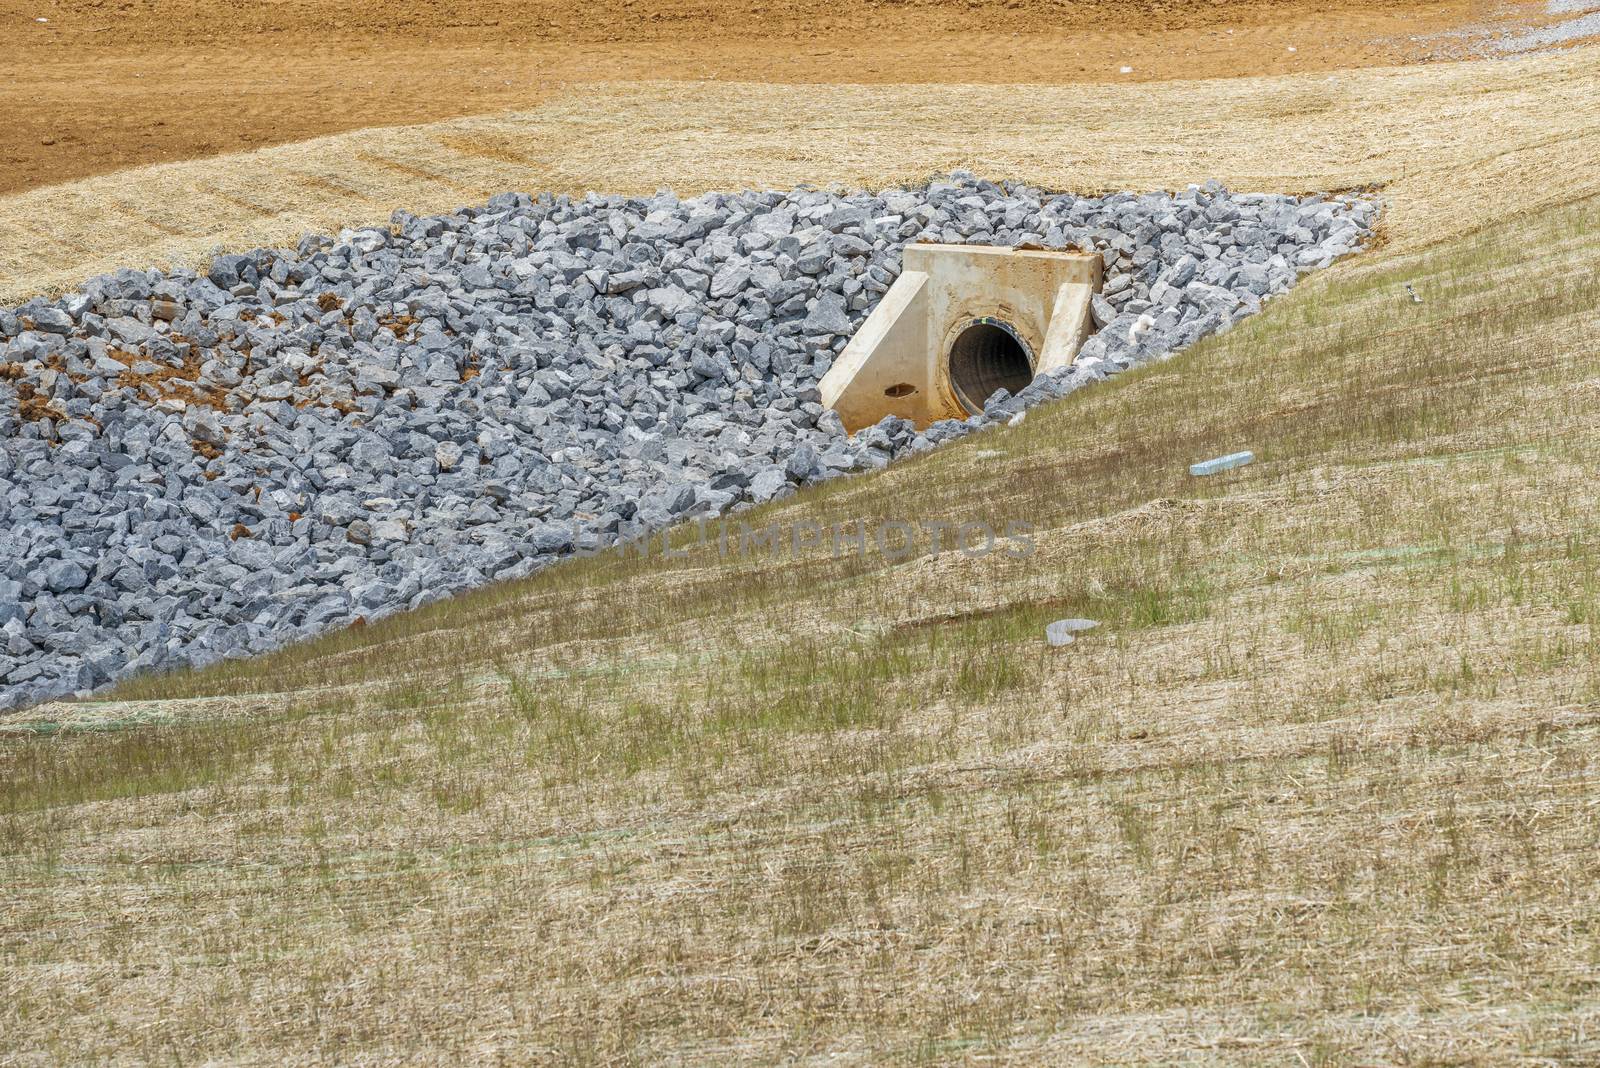 Horizontal shot of a culvert and drainage ditch under construction.  

Drainage ditch pipe in background.